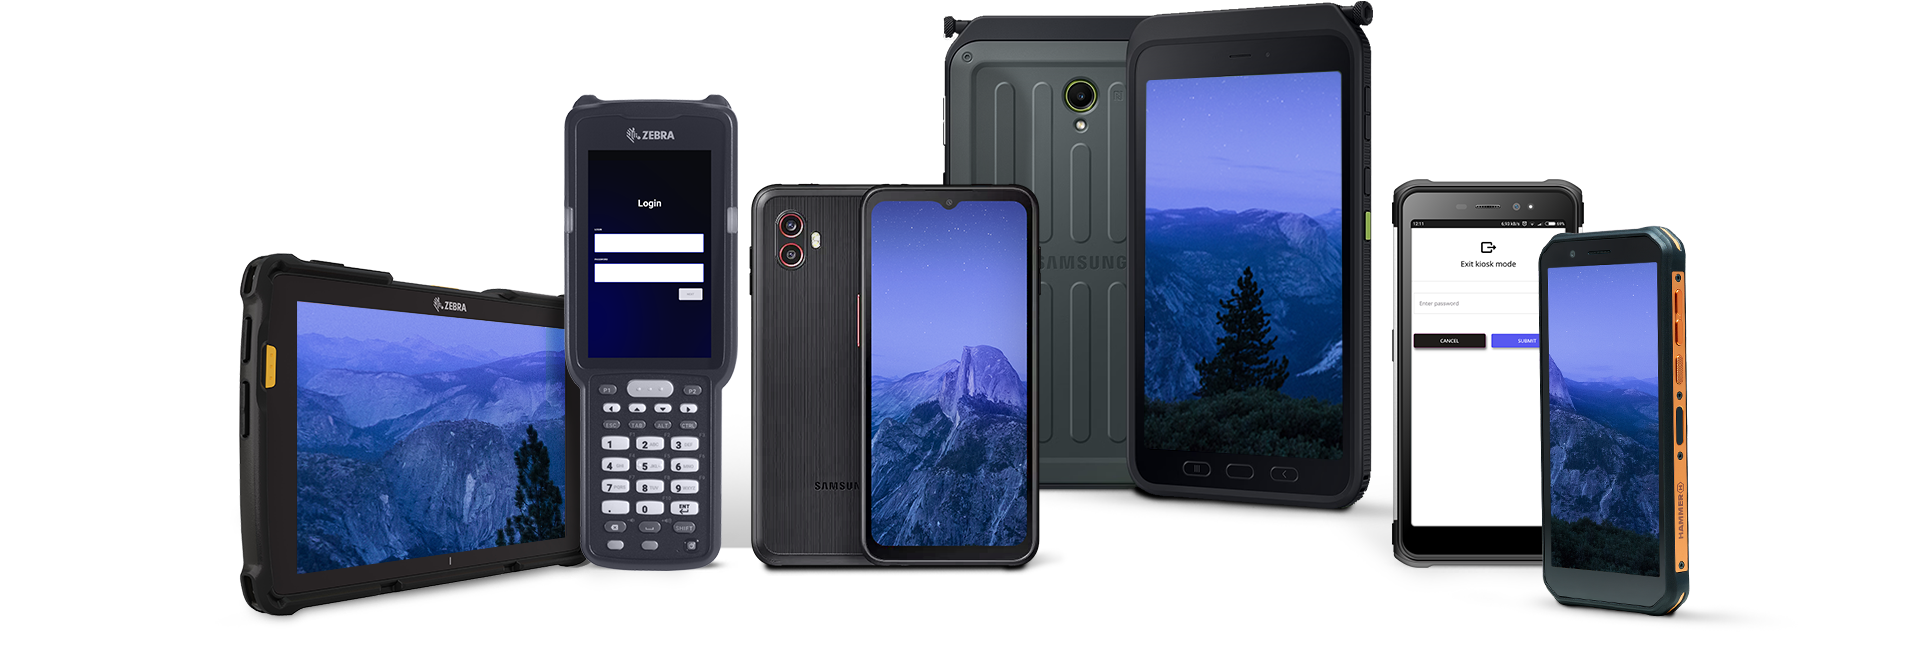 various rugged devices, including ZEBRA tablet and scanner, Samsung tablet and smartphones, Hammer phones